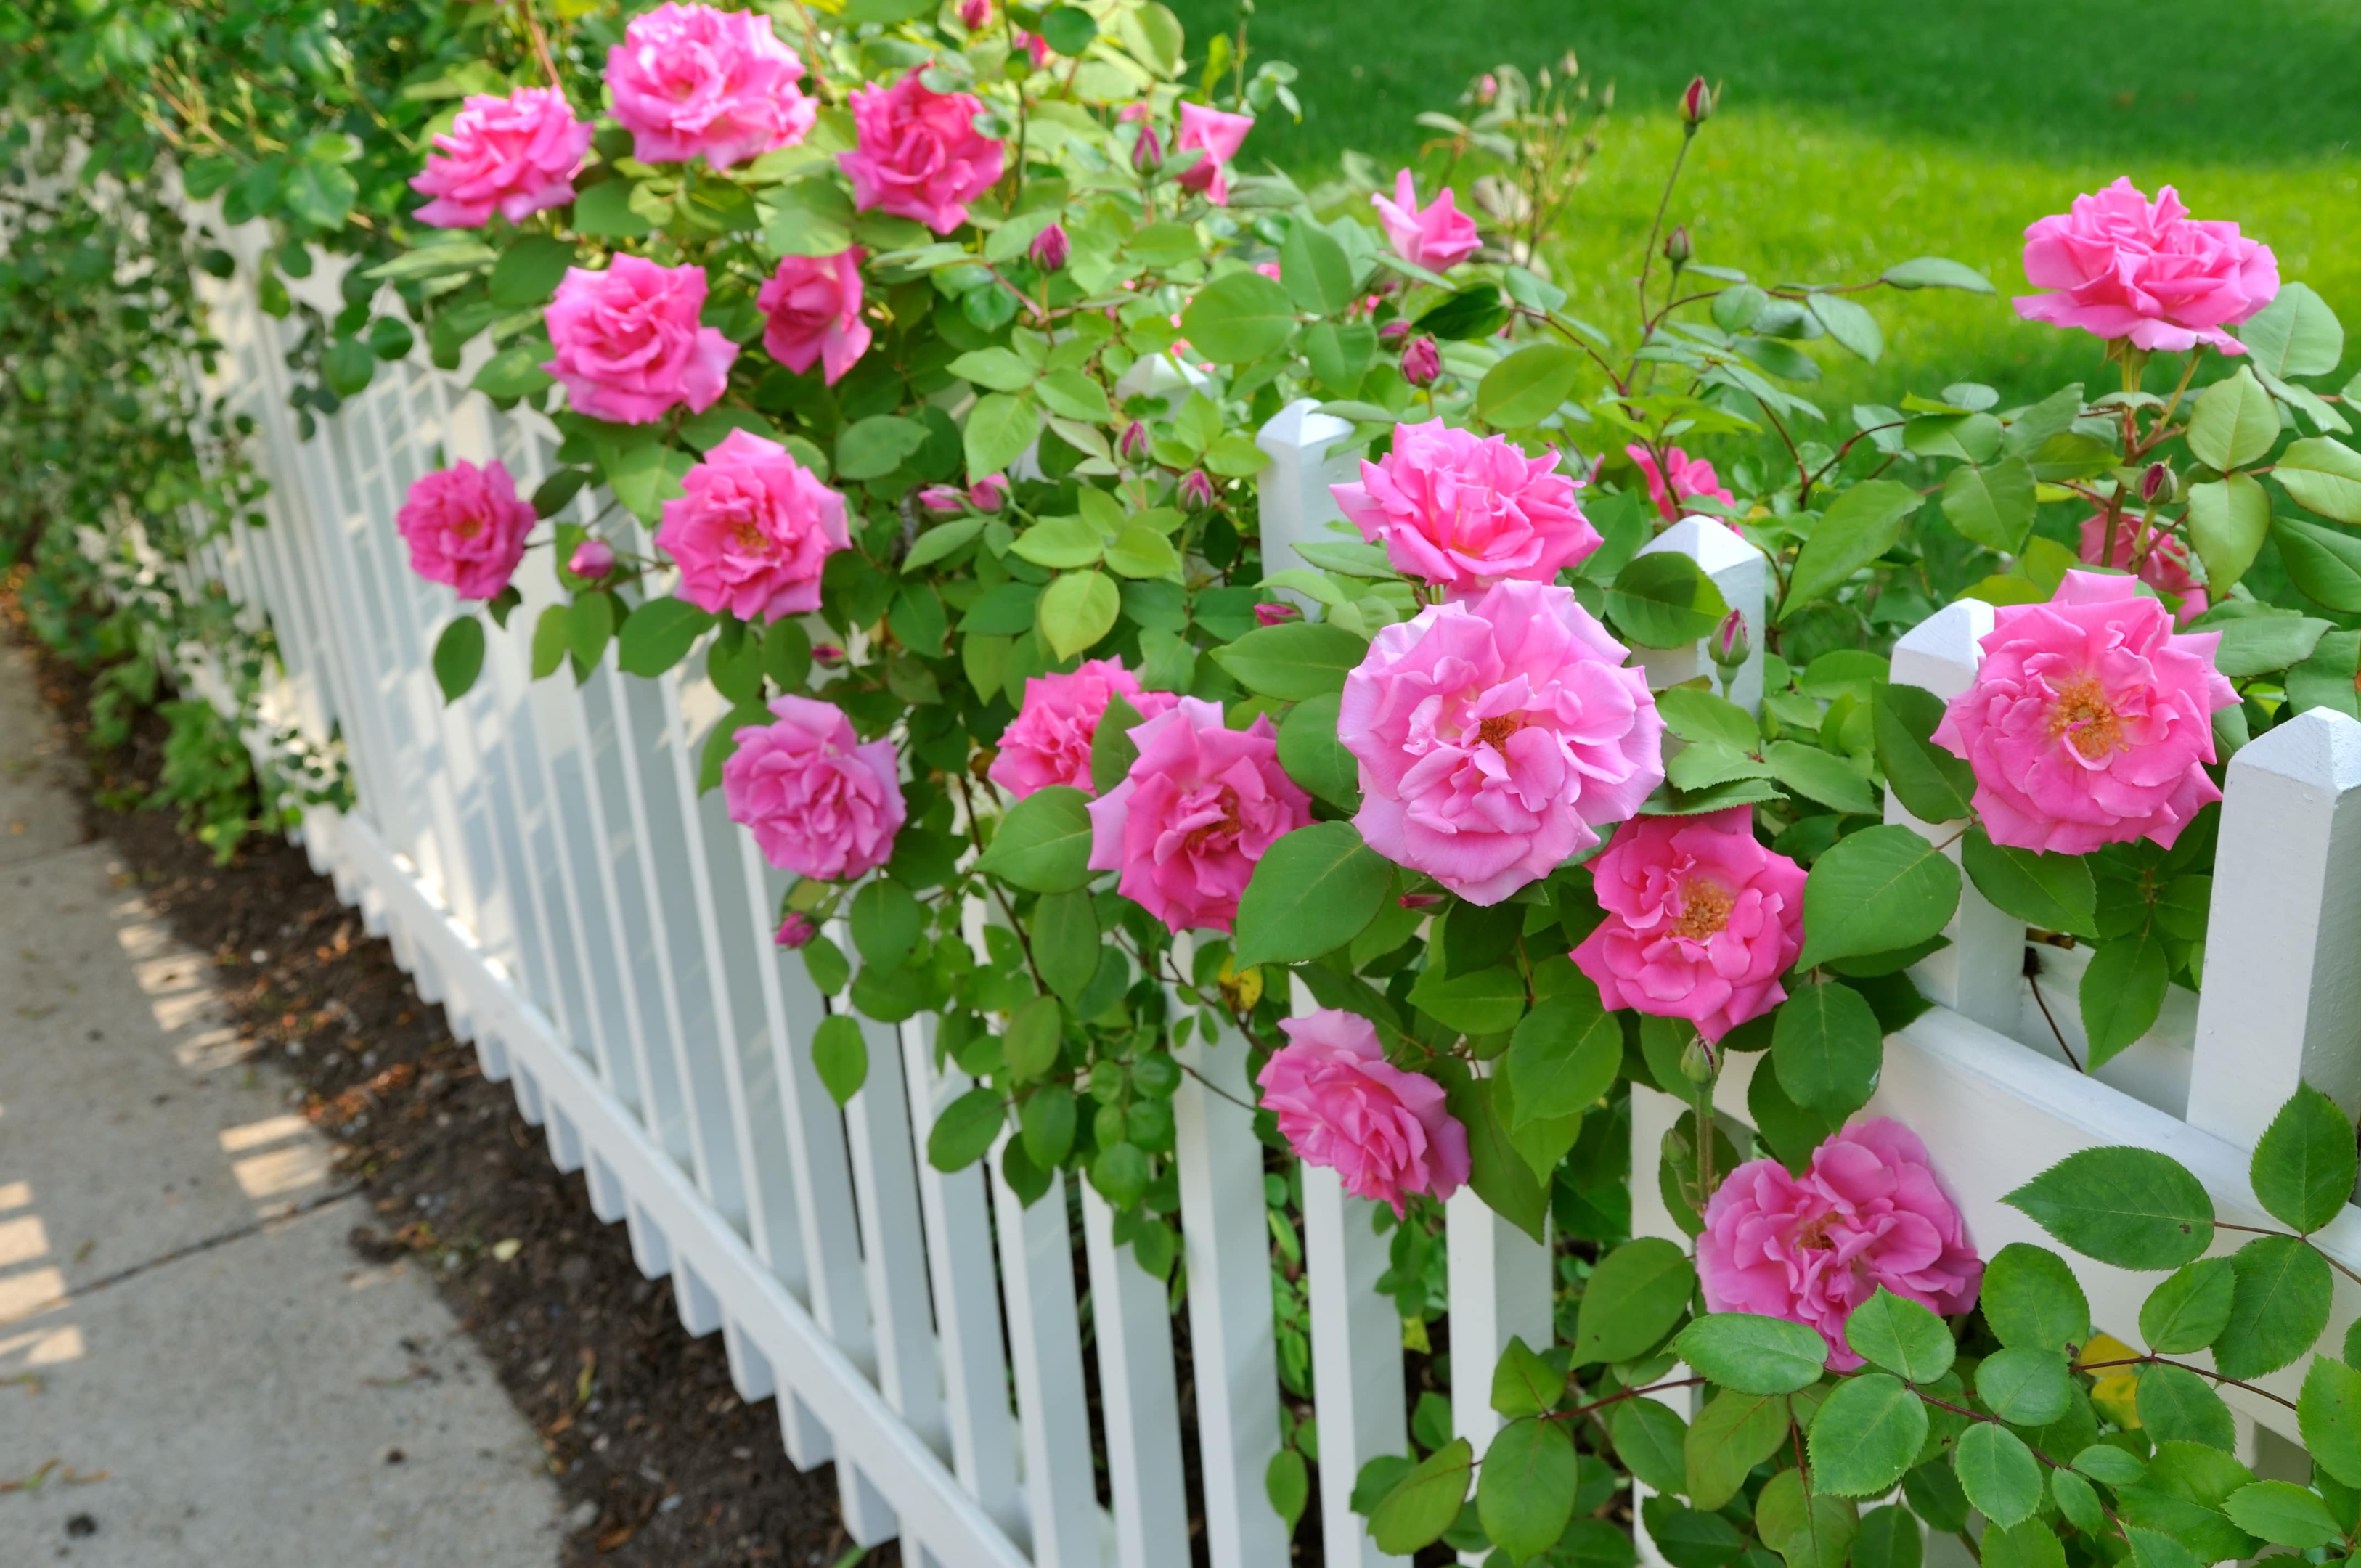 a pink rose garden over a white picket fence